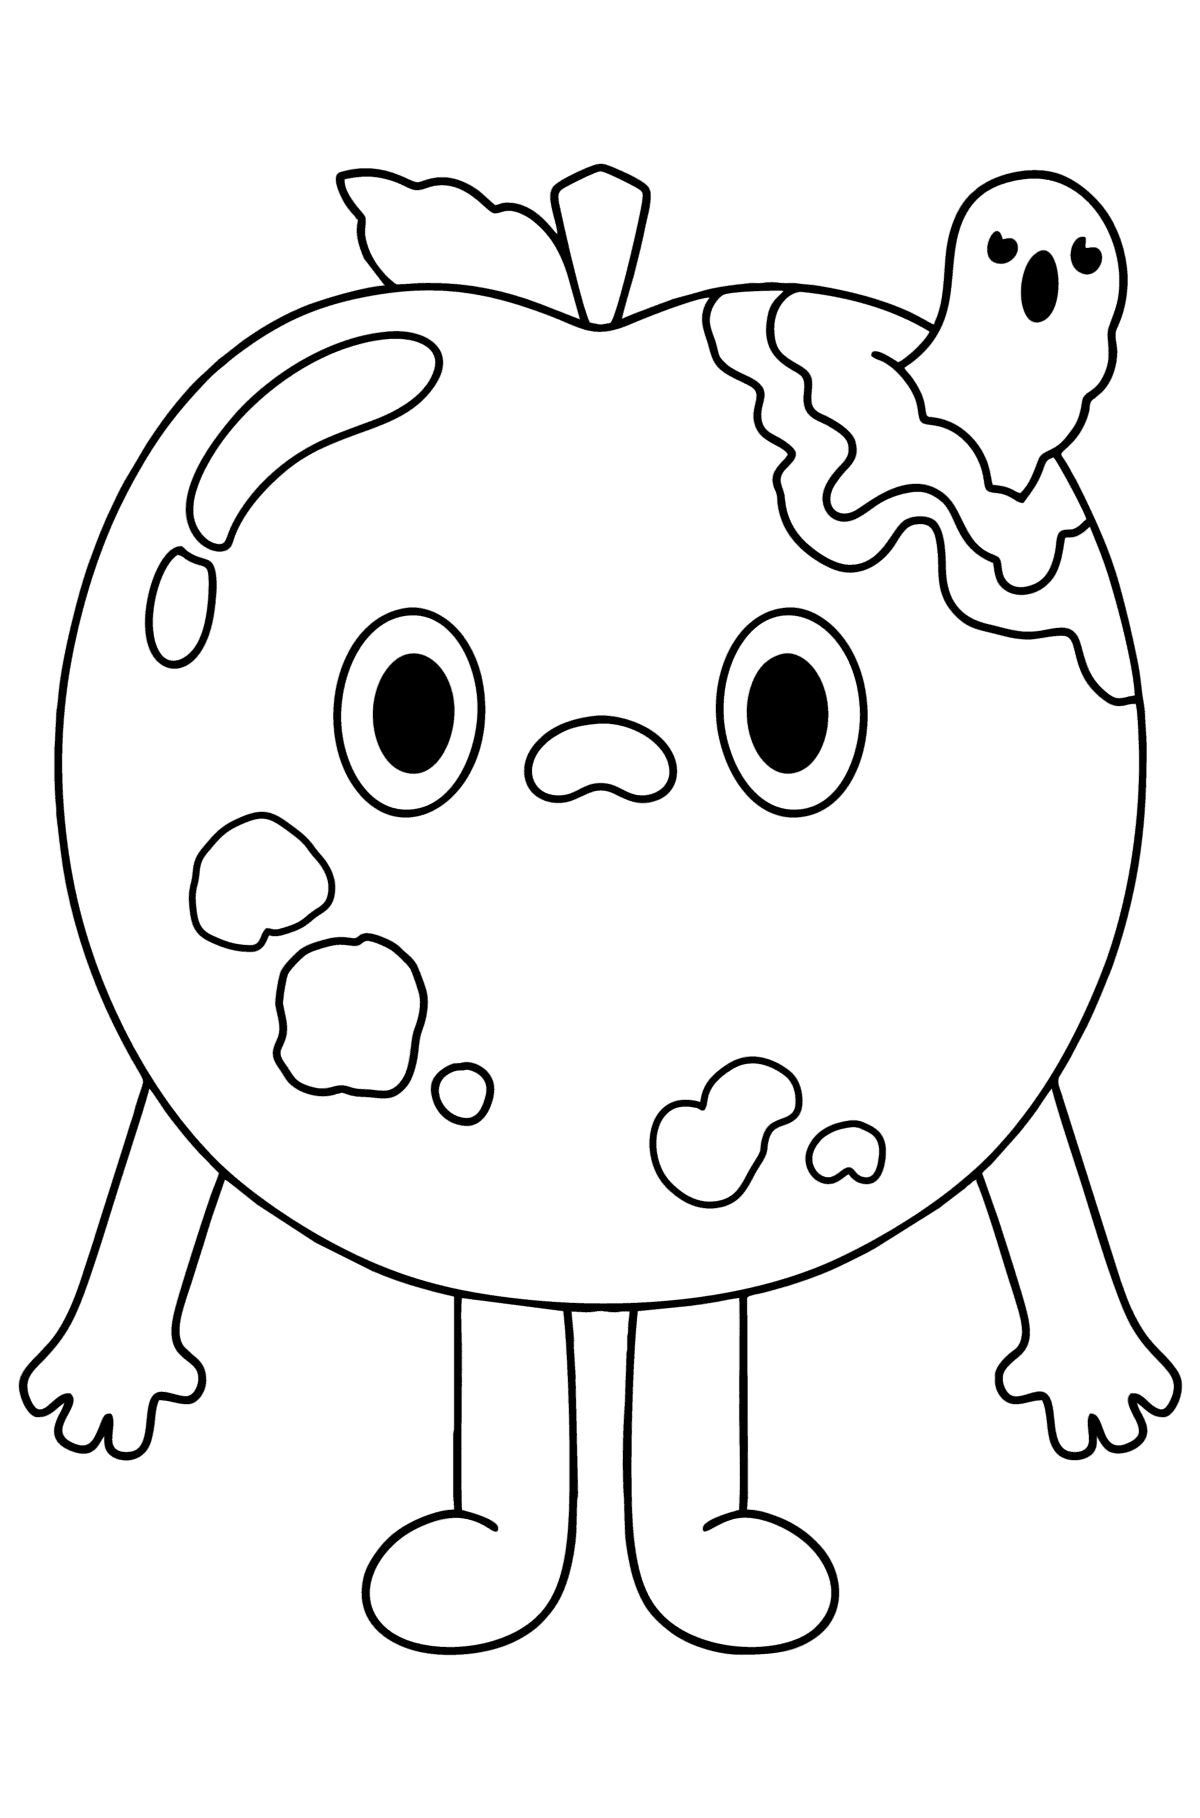 Coloring page Tocaboca heroes 02 - Coloring Pages for Kids